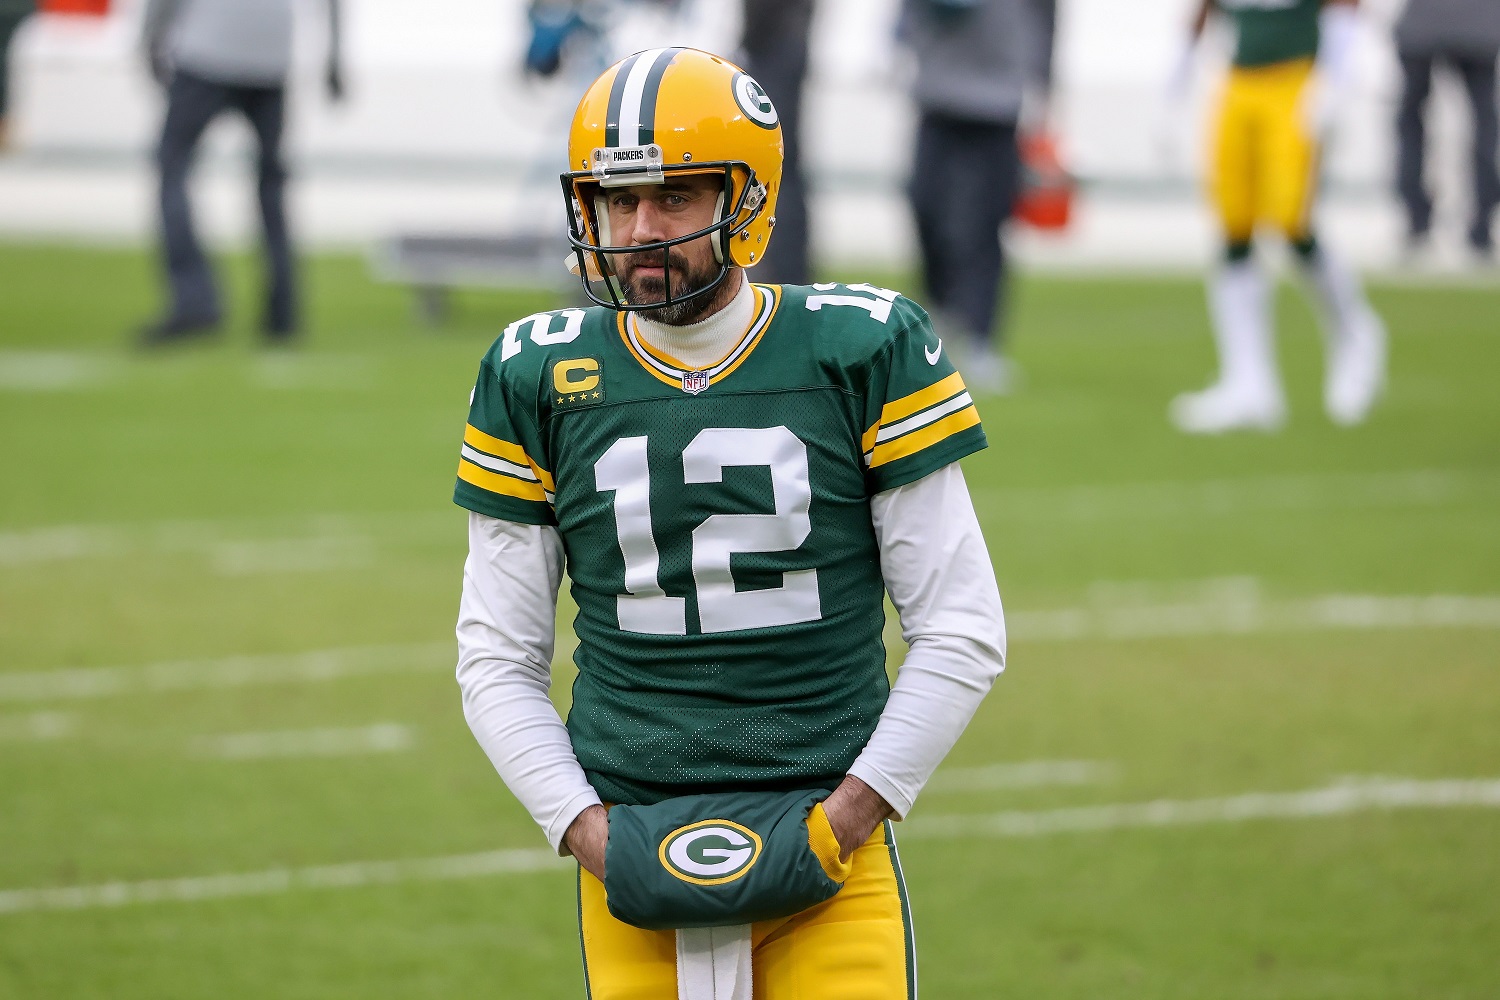 Aaron Rodgers of the Green Bay Packers warms up before the NFC Championship game against the Tampa Bay Buccaneers on Jan. 24, 2021. | Dylan Buell/Getty Images